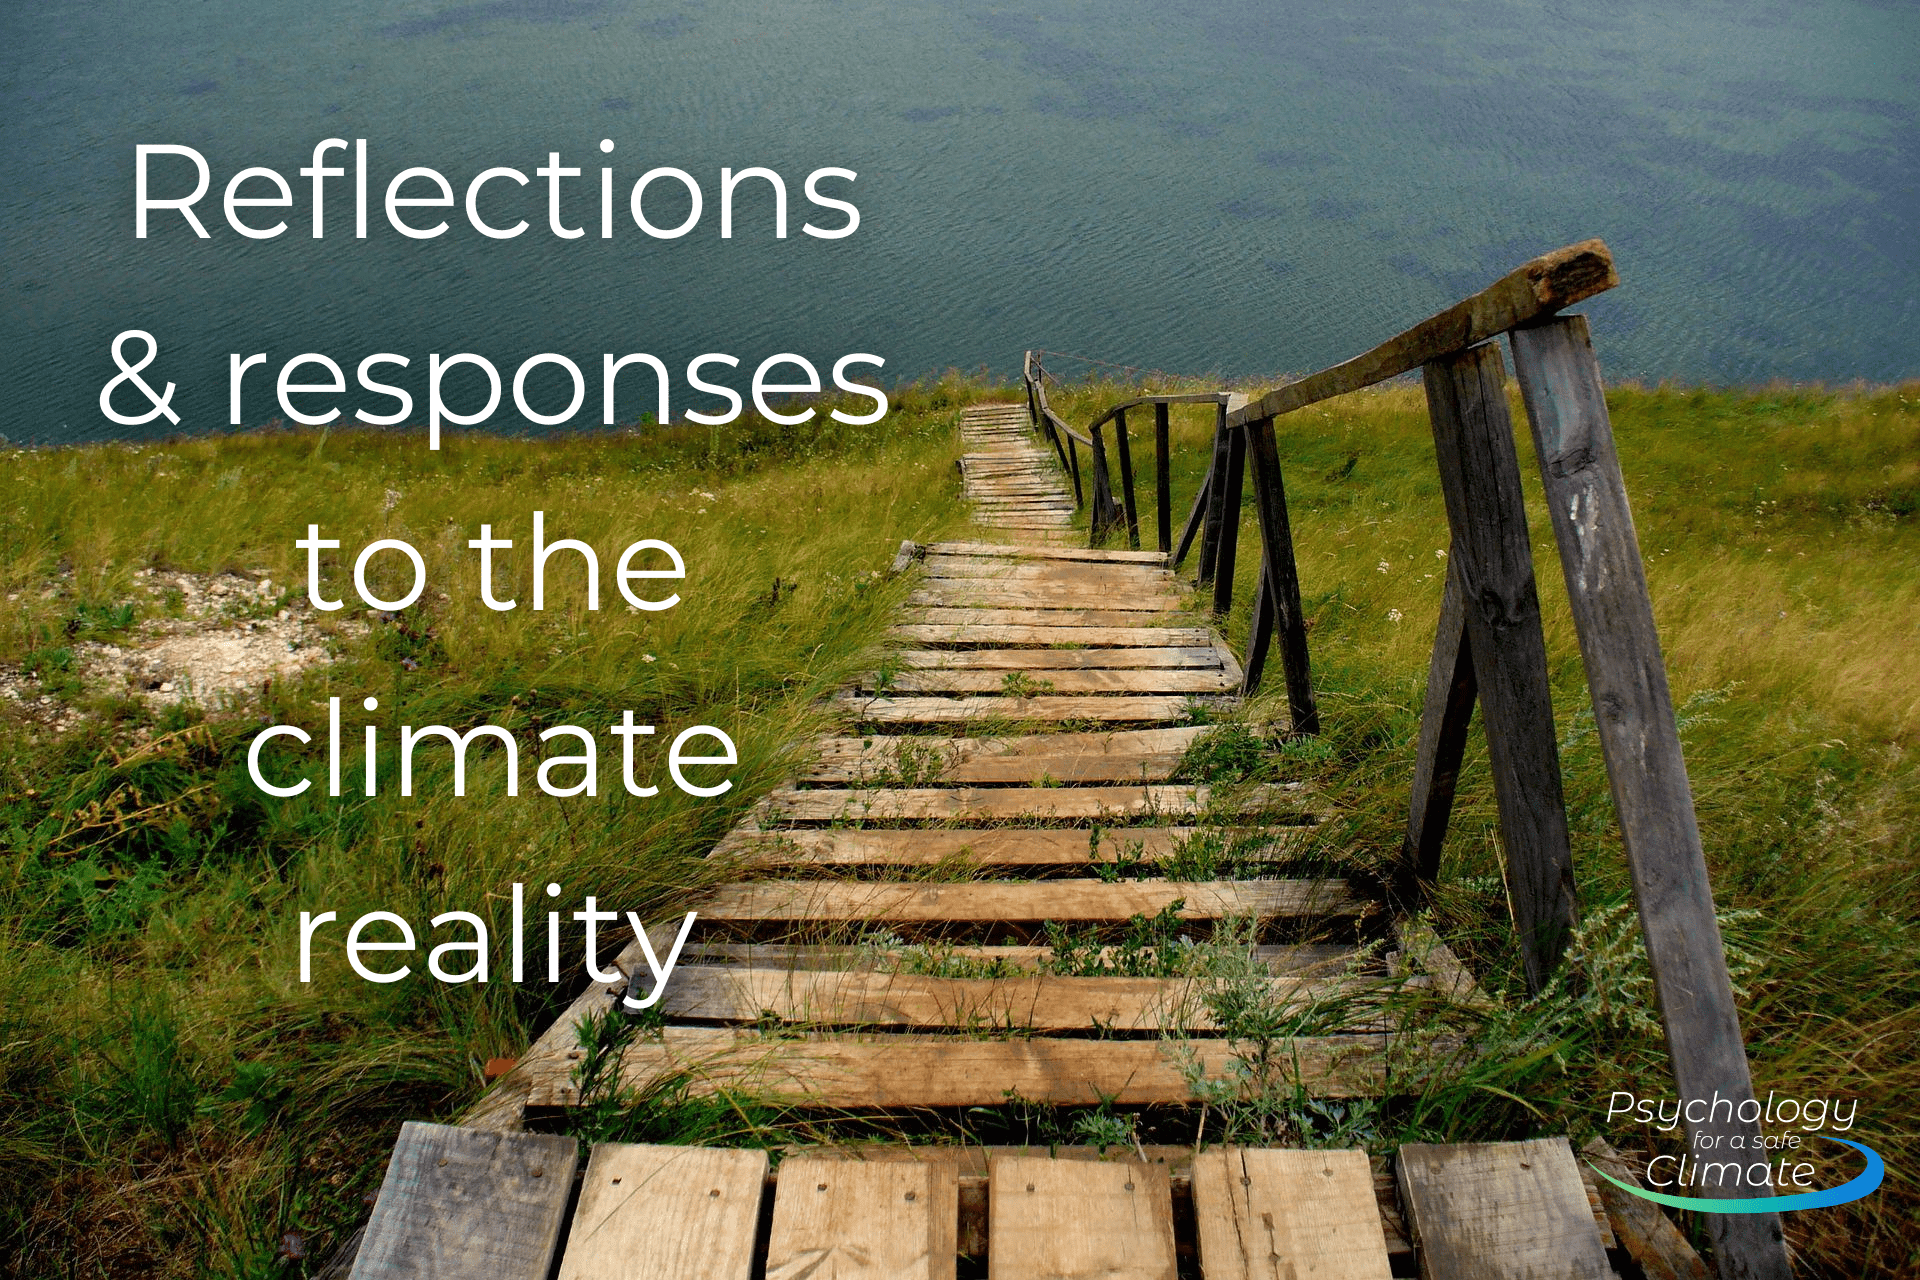 PD2: Reflections and responses to the climate reality